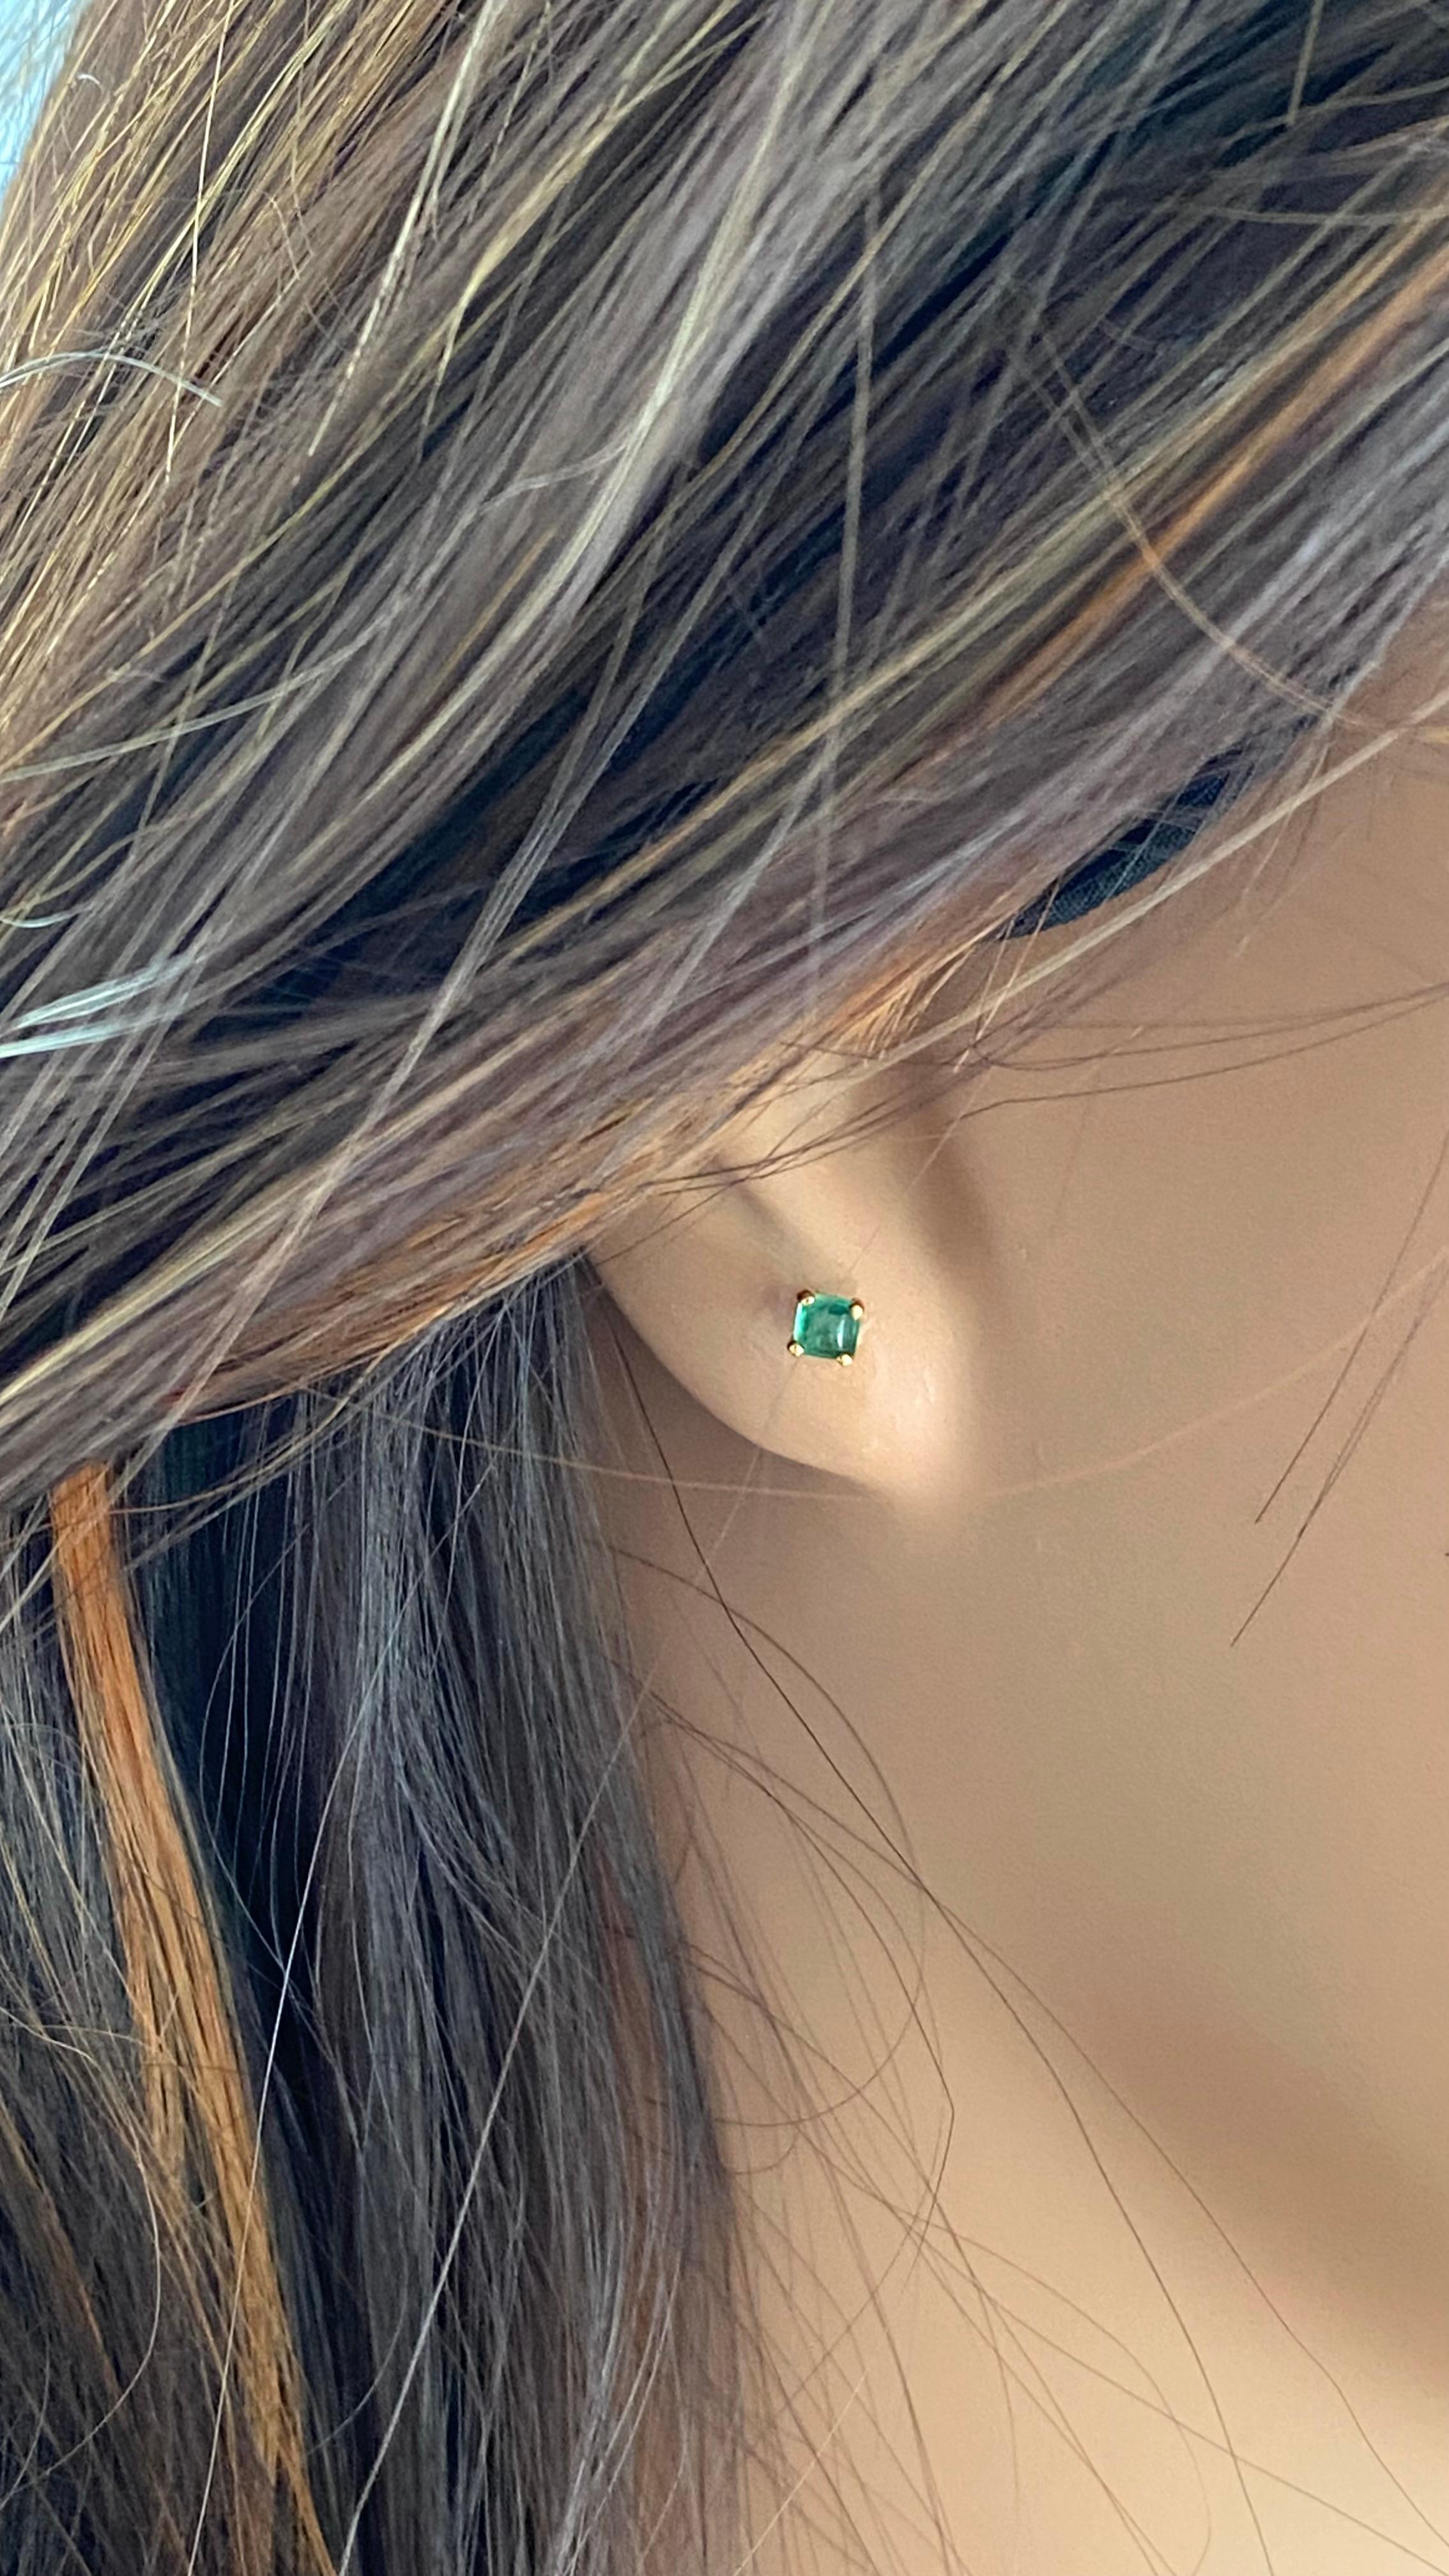 Introducing our exquisite 14 karat yellow gold Tiny Square Cabochon Emerald Stud Earrings, the epitome of elegance and sophistication. Crafted with precision and care, these delicate earrings are designed to adorn your second or third earlobe